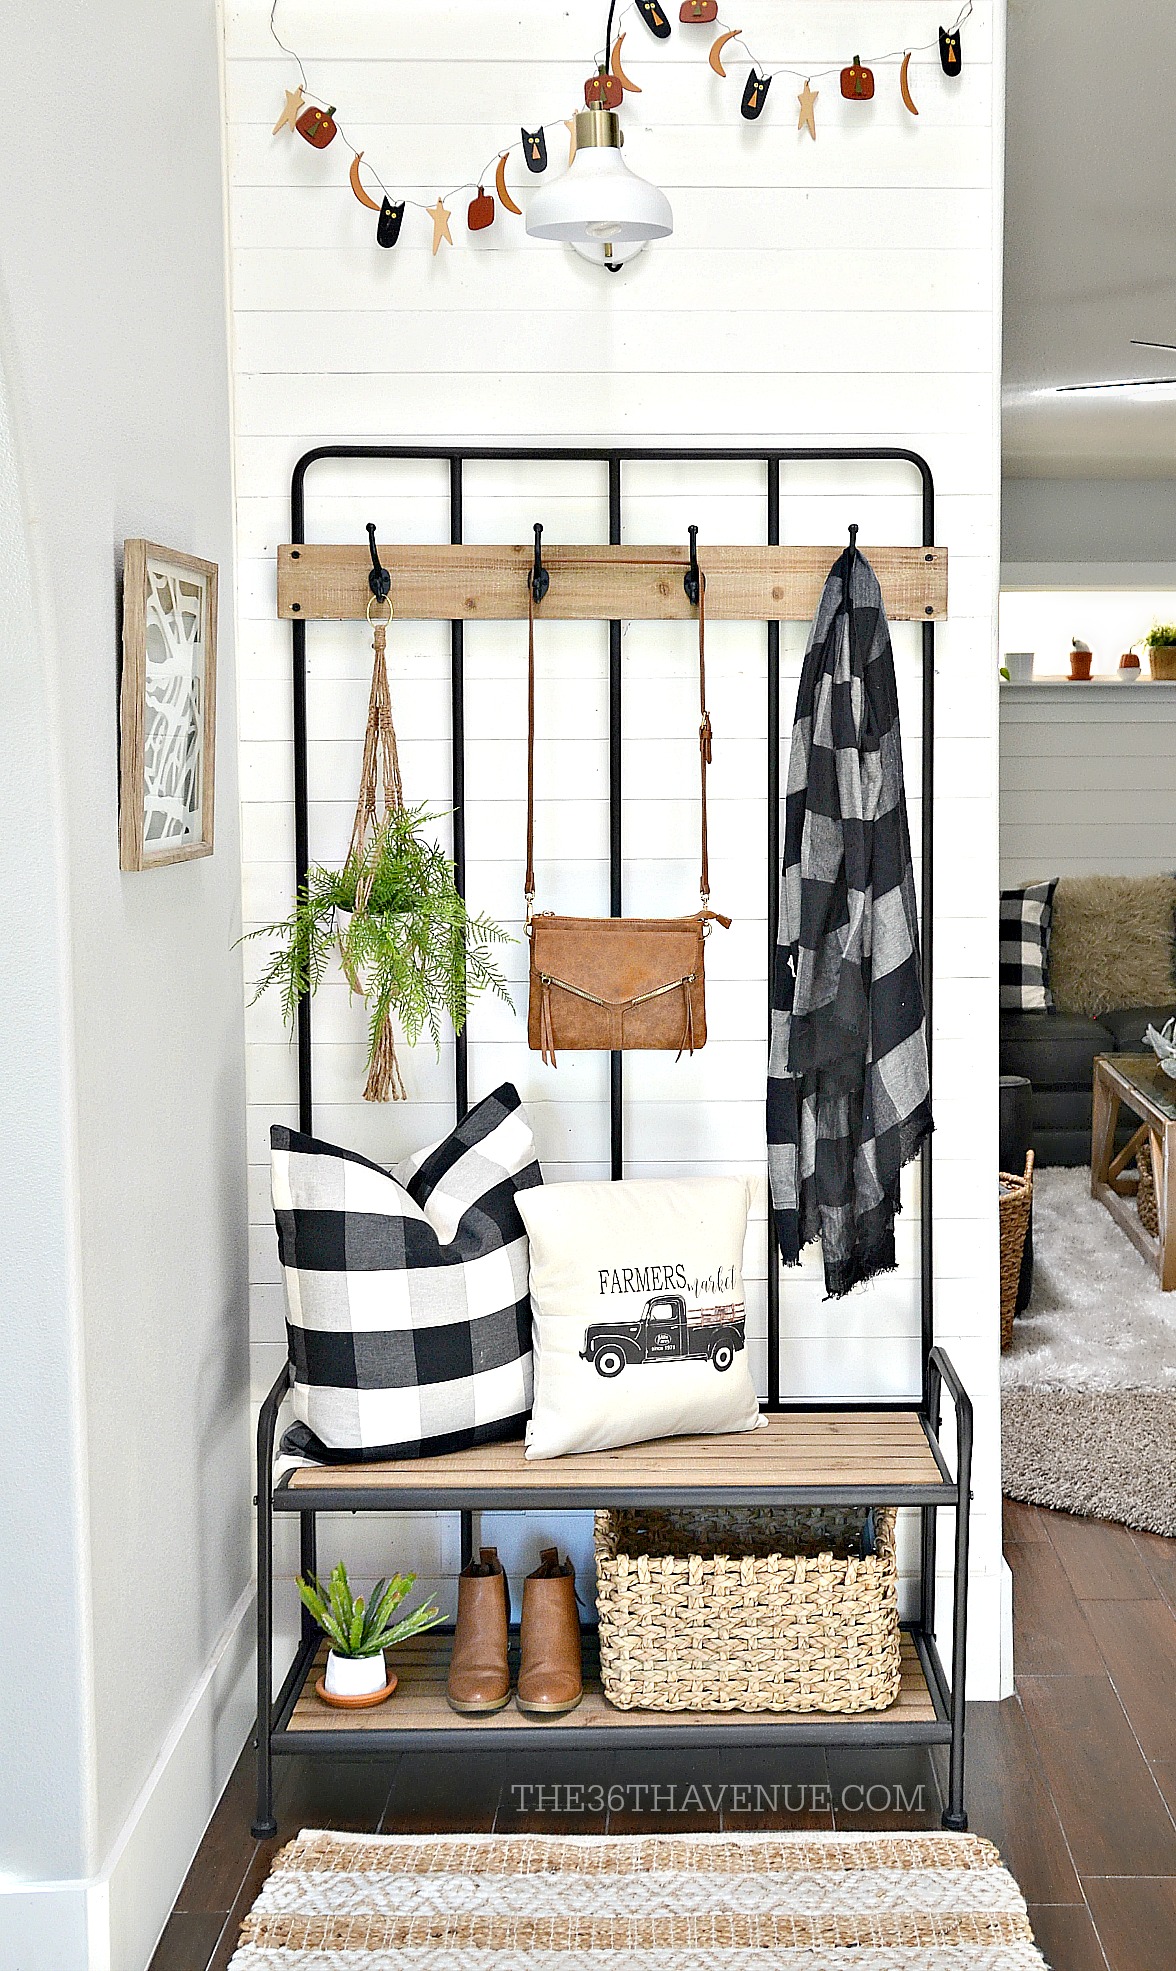 Farmhouse Entryway Decor Ideas that are affordable and easy to put together.